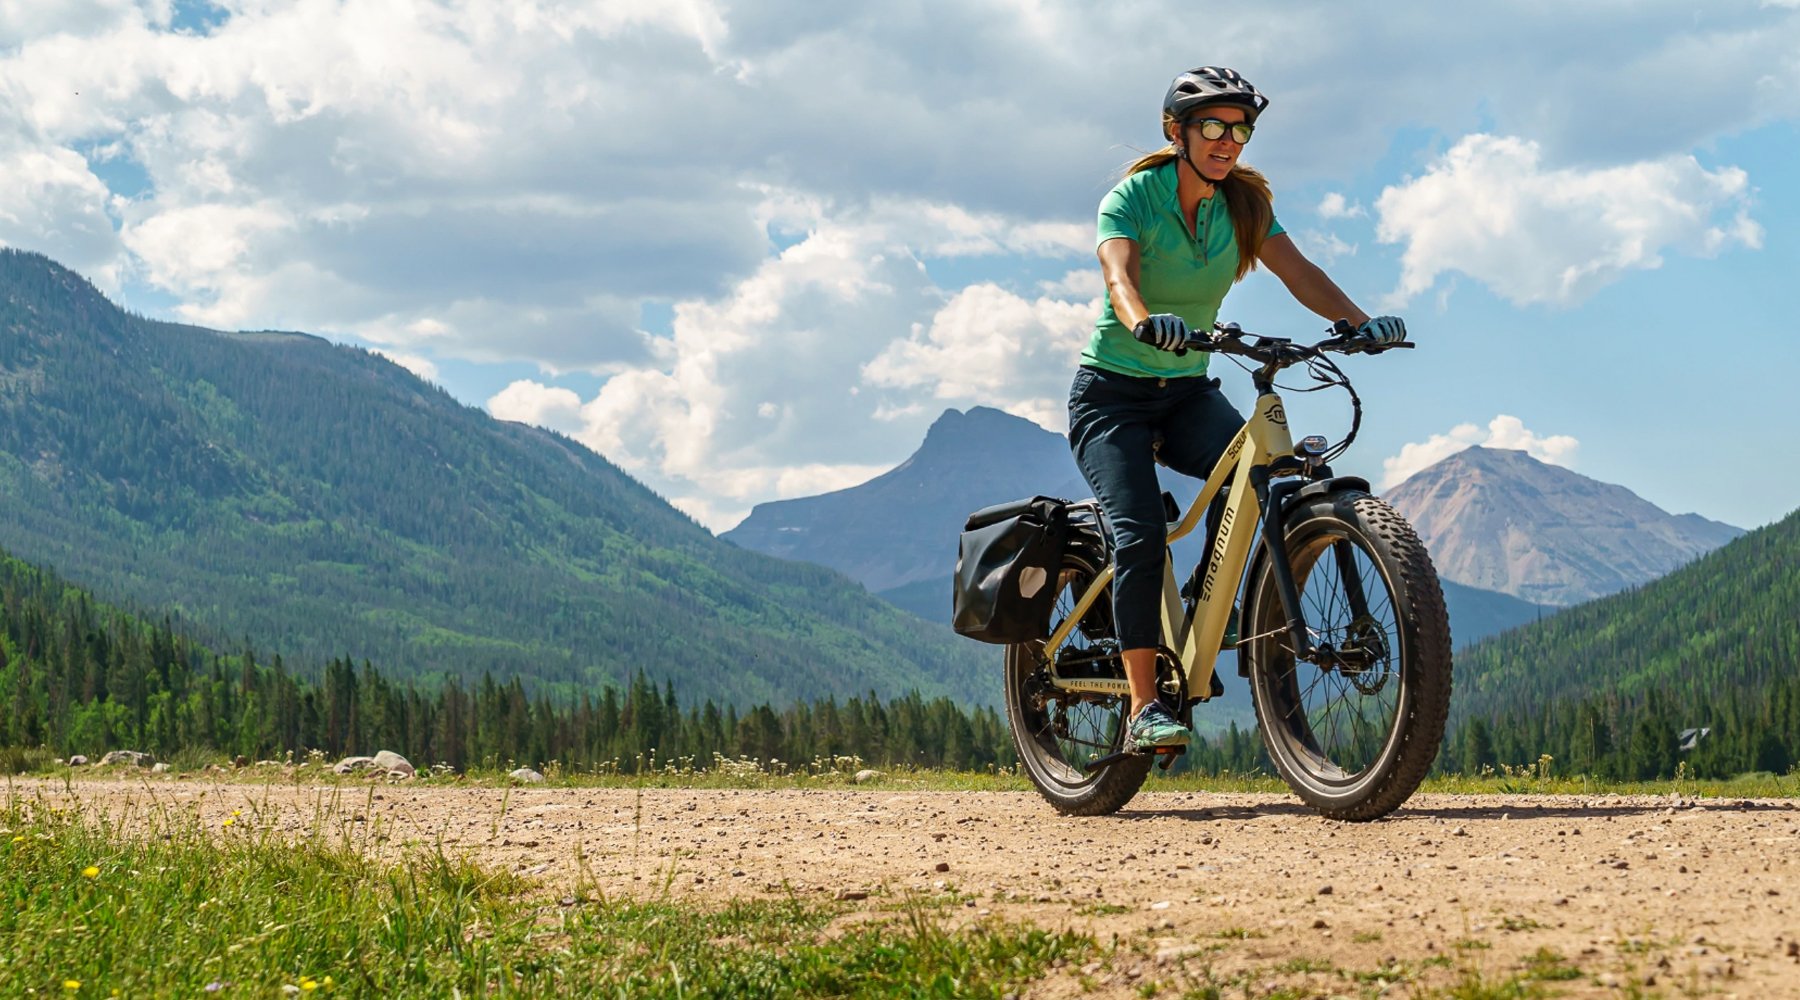 Rider on Magnum Scout electric bike in green polo shirt denim capri pants on dirt trail with mountains blue sky white clouds